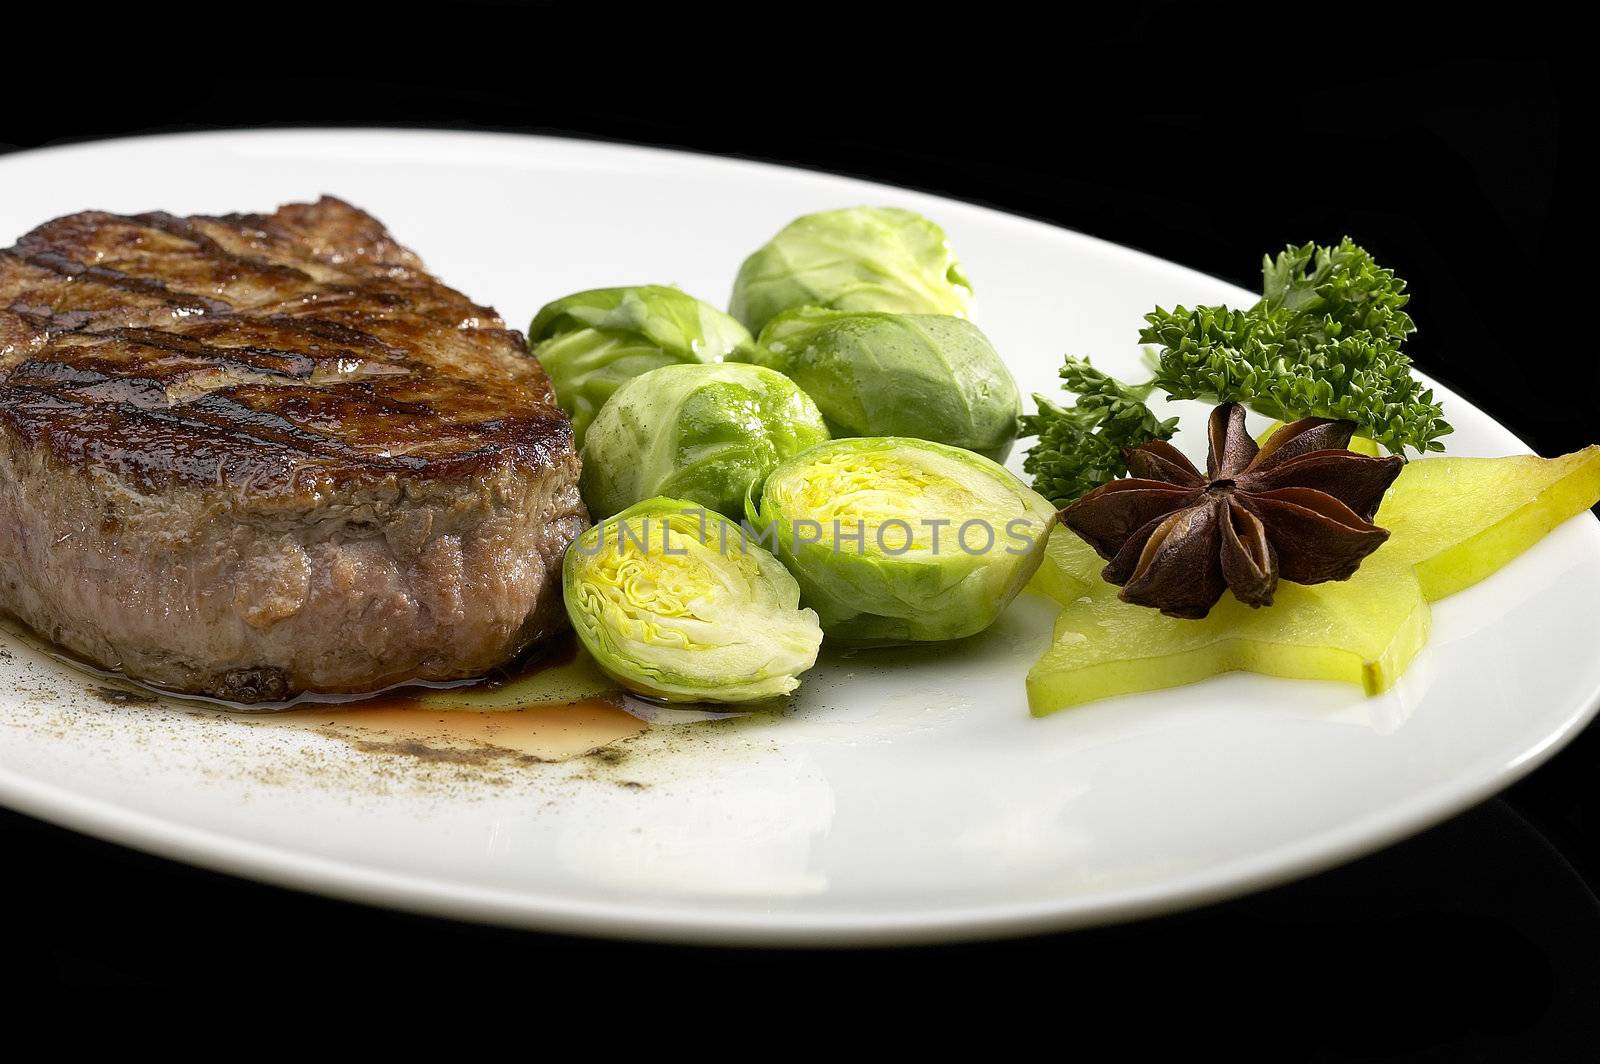 juicy filet mignon on plate with brussel sprout over black background